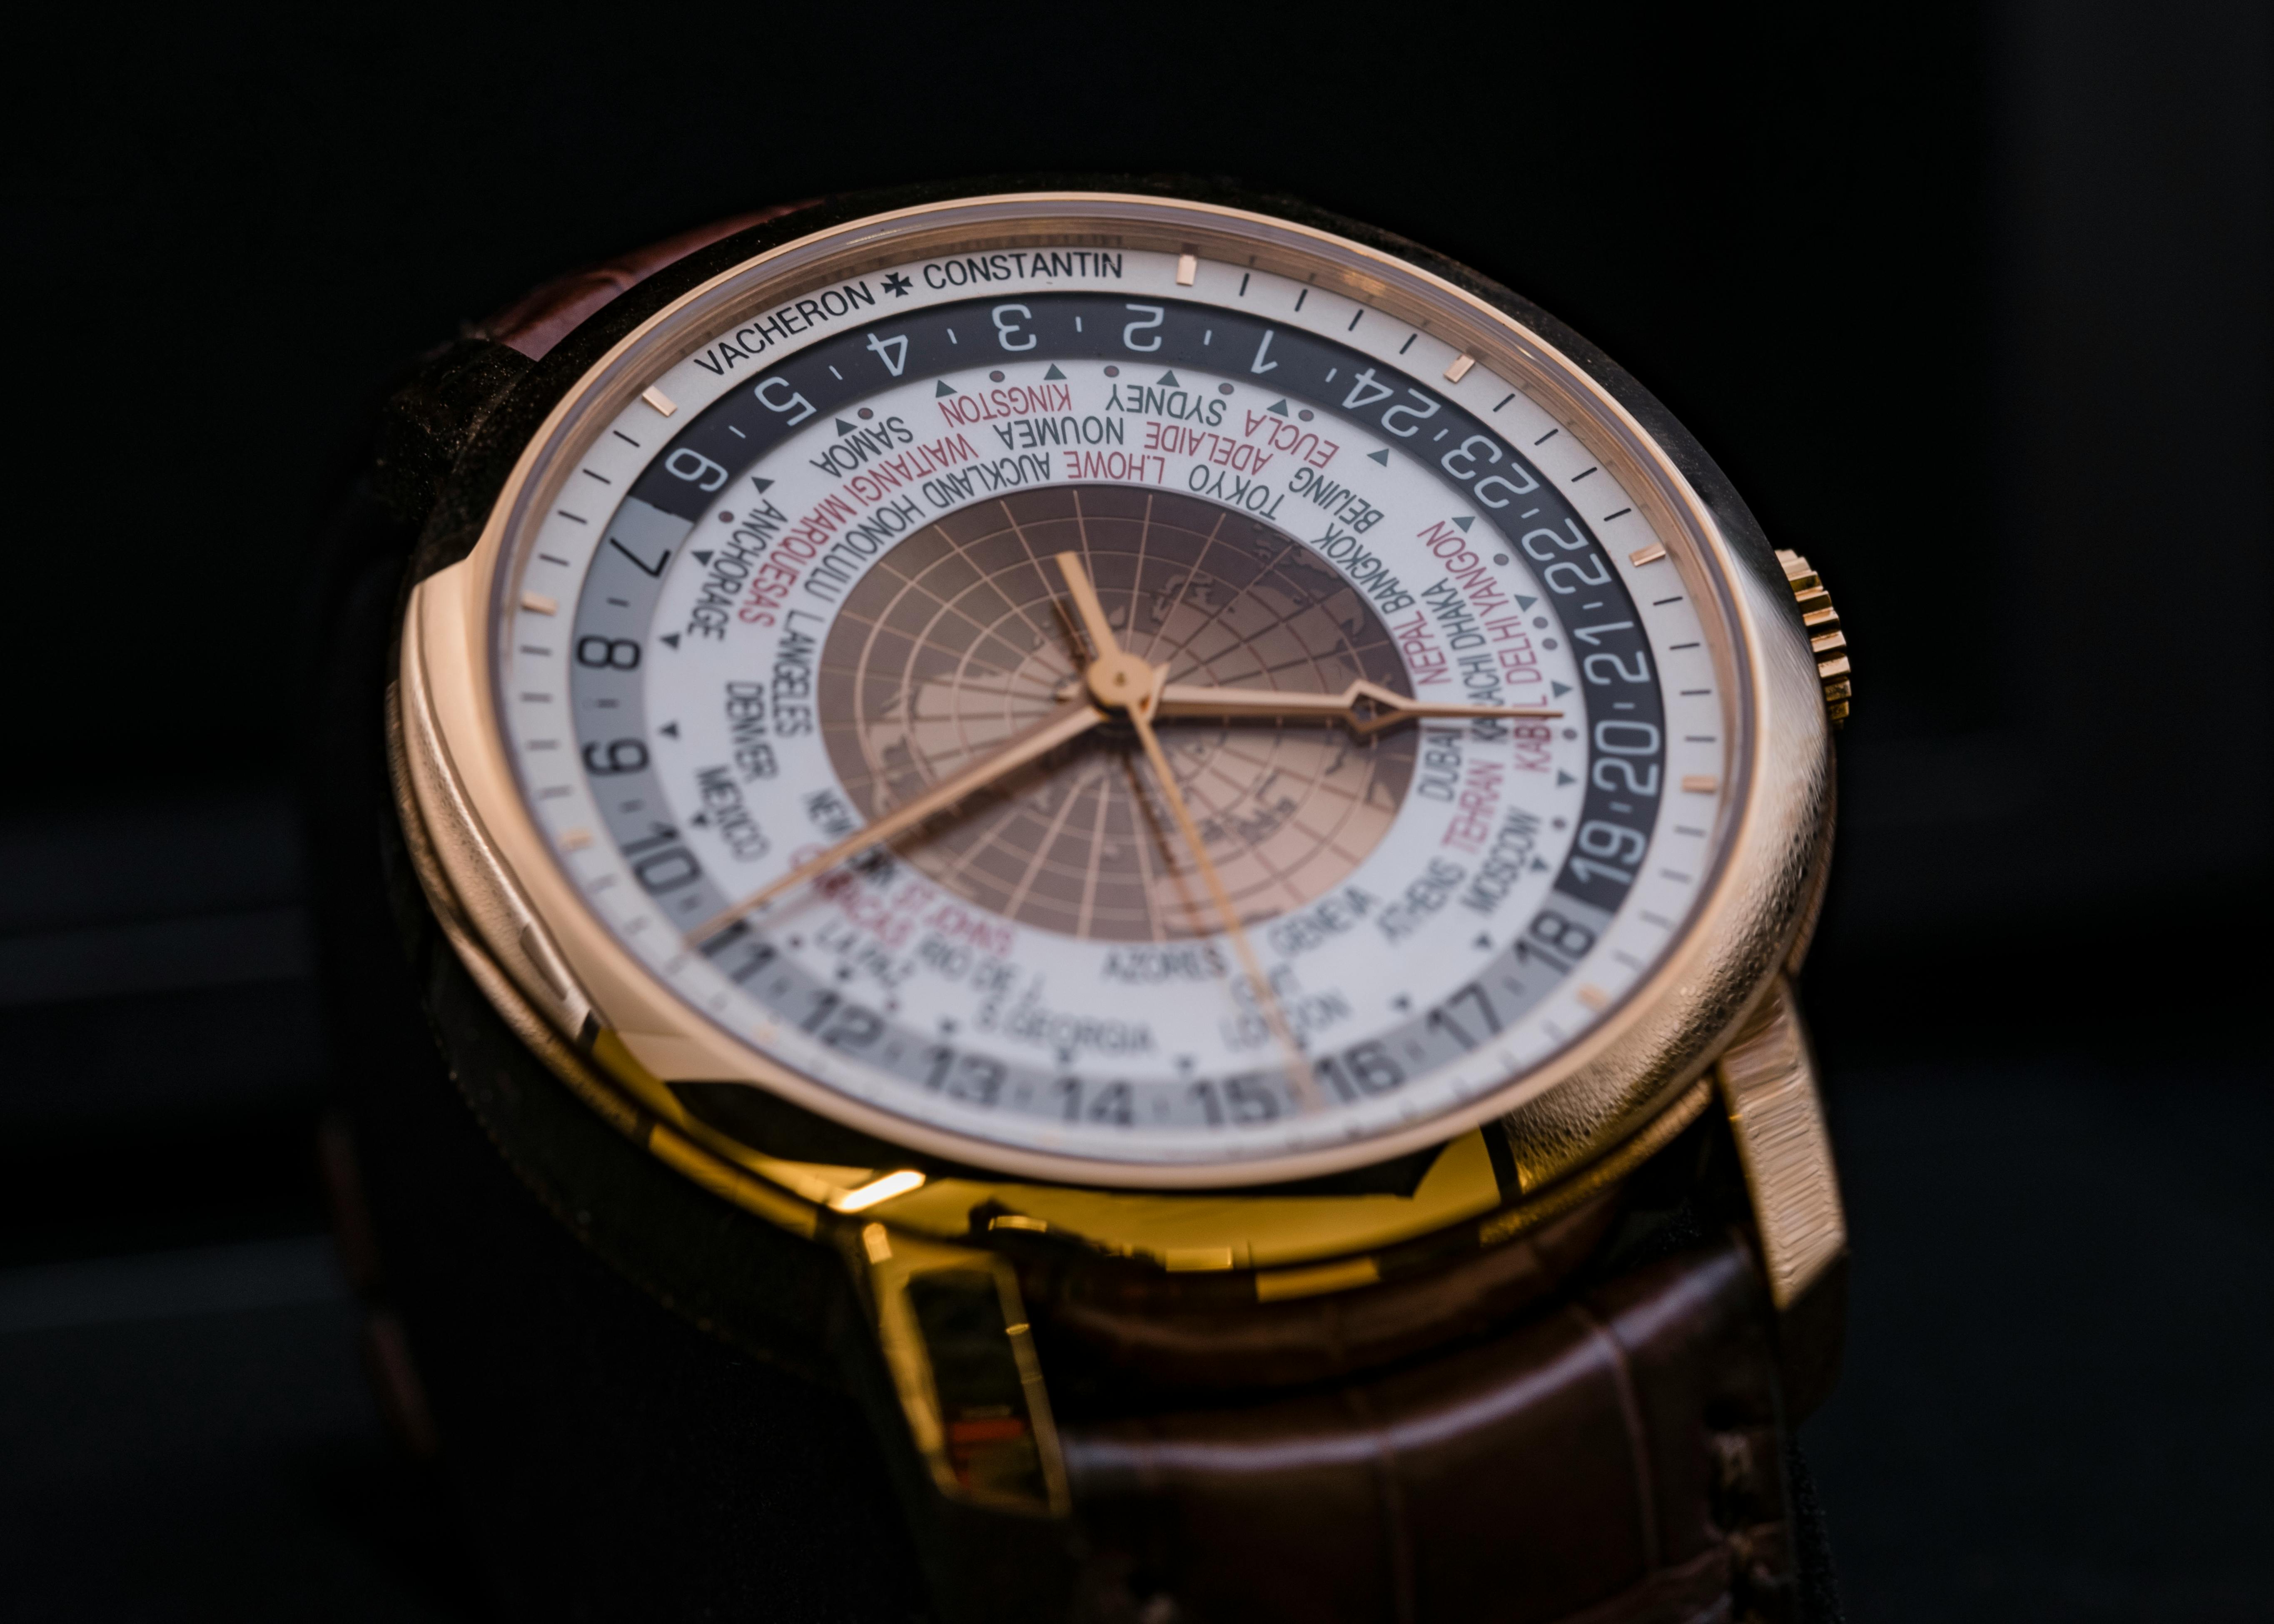 2018 VACHERON CONSTANTIN TRADITIONELLE WORLD TIME for sale by auction ...